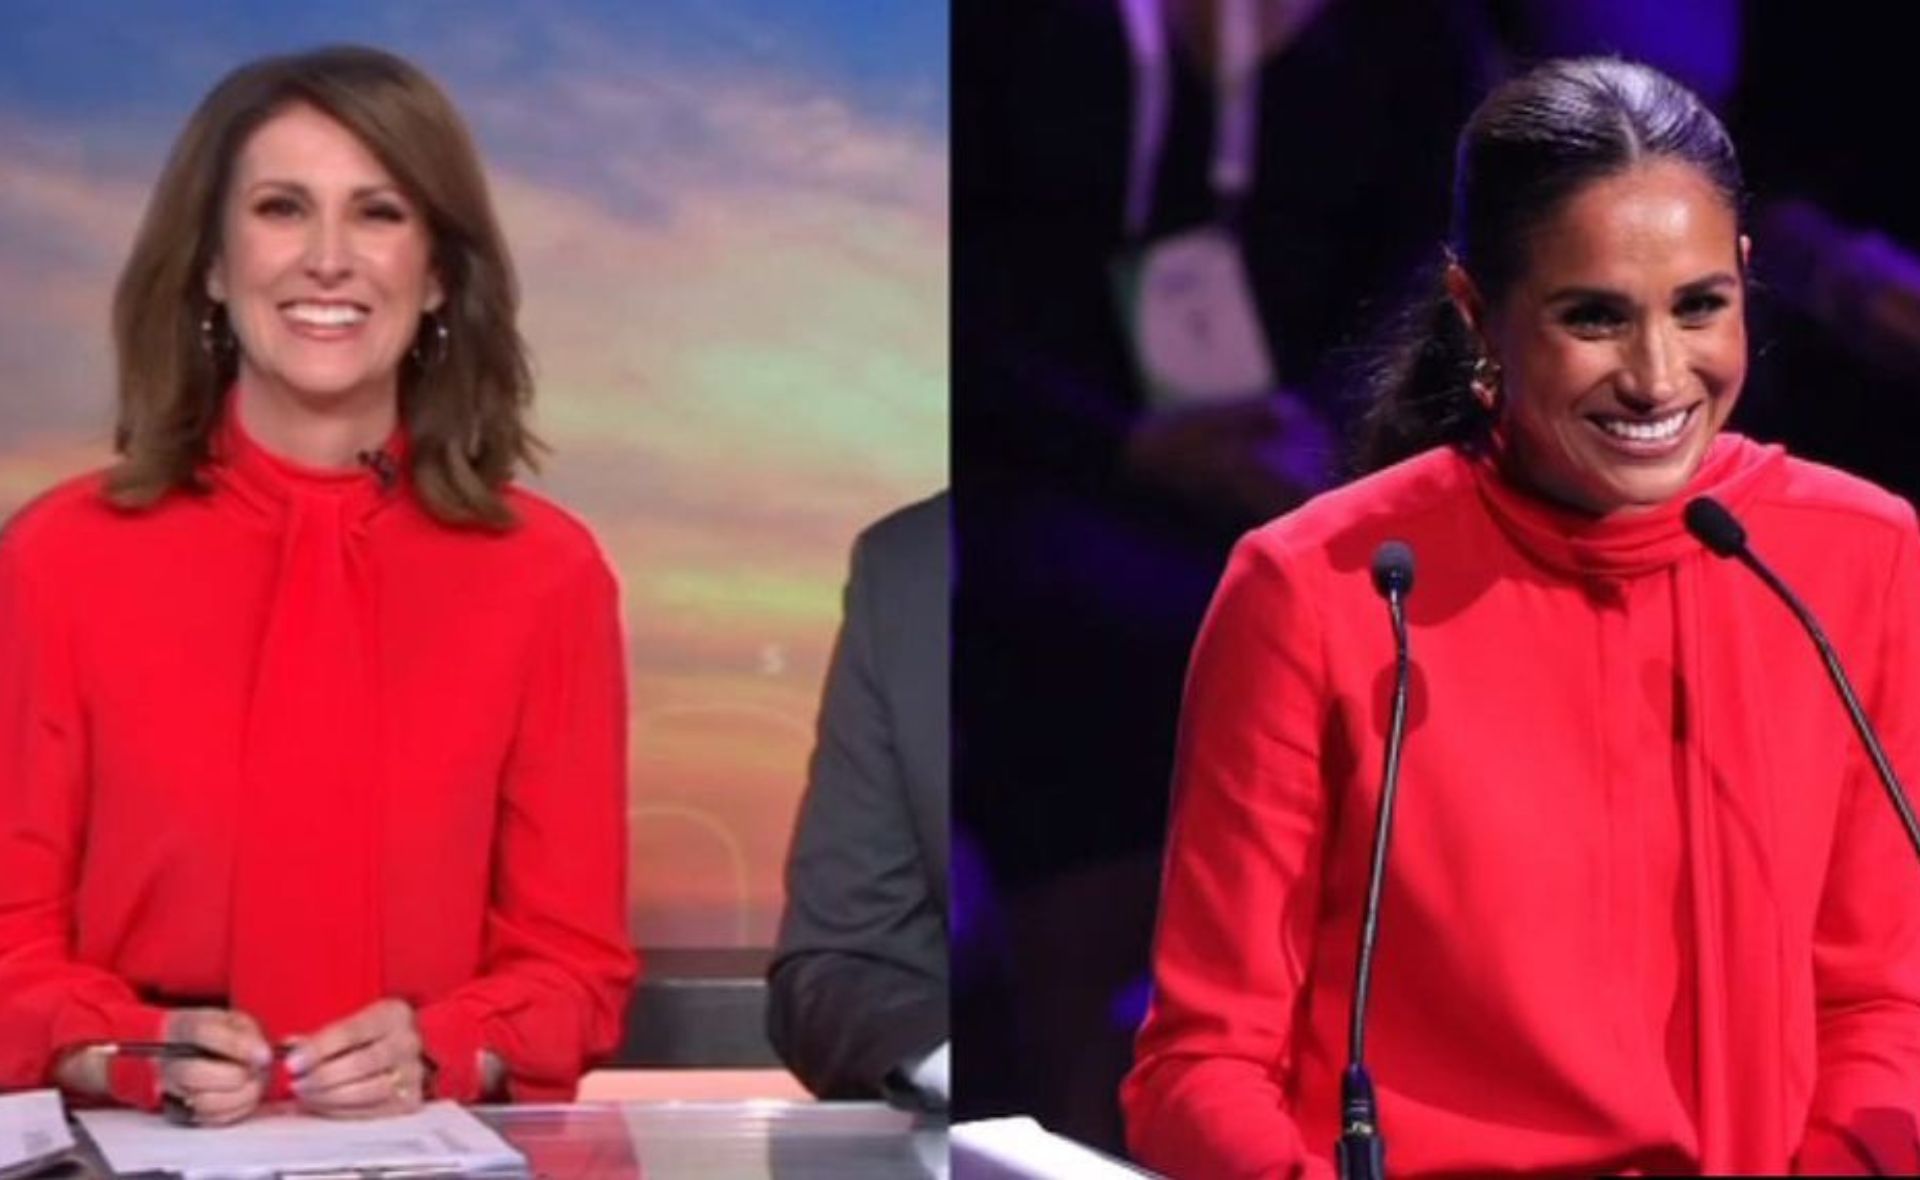 We are seeing double! Sunrise’s Natalie Barr accuses Meghan Markle of ‘loaning’ her red top